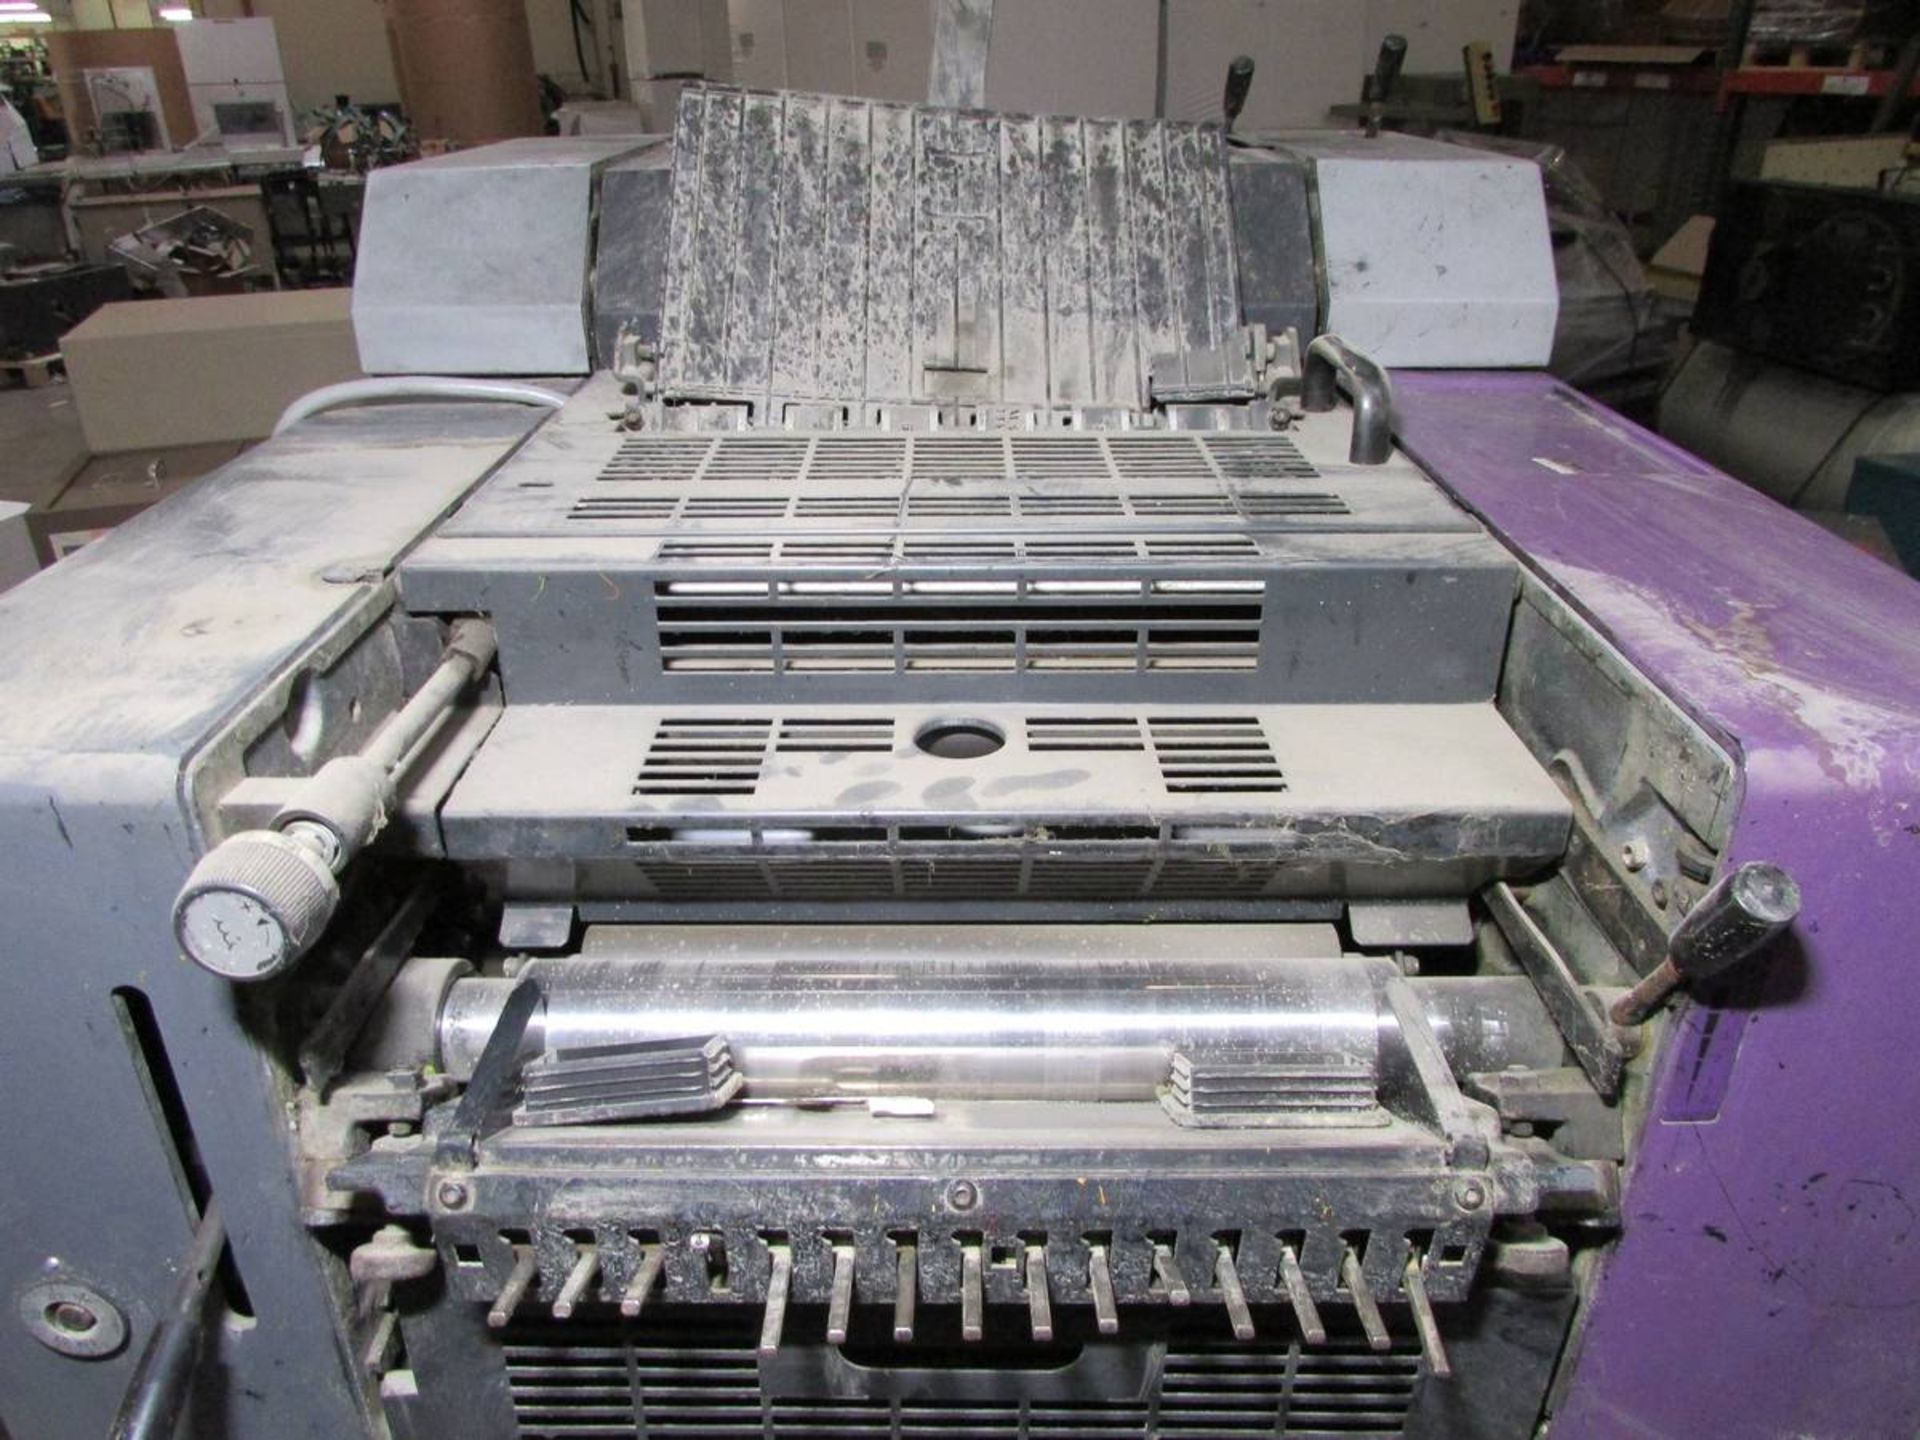 1999 Heidelberg Quickmaster 46-2 Two Color Printing Press - Image 6 of 16